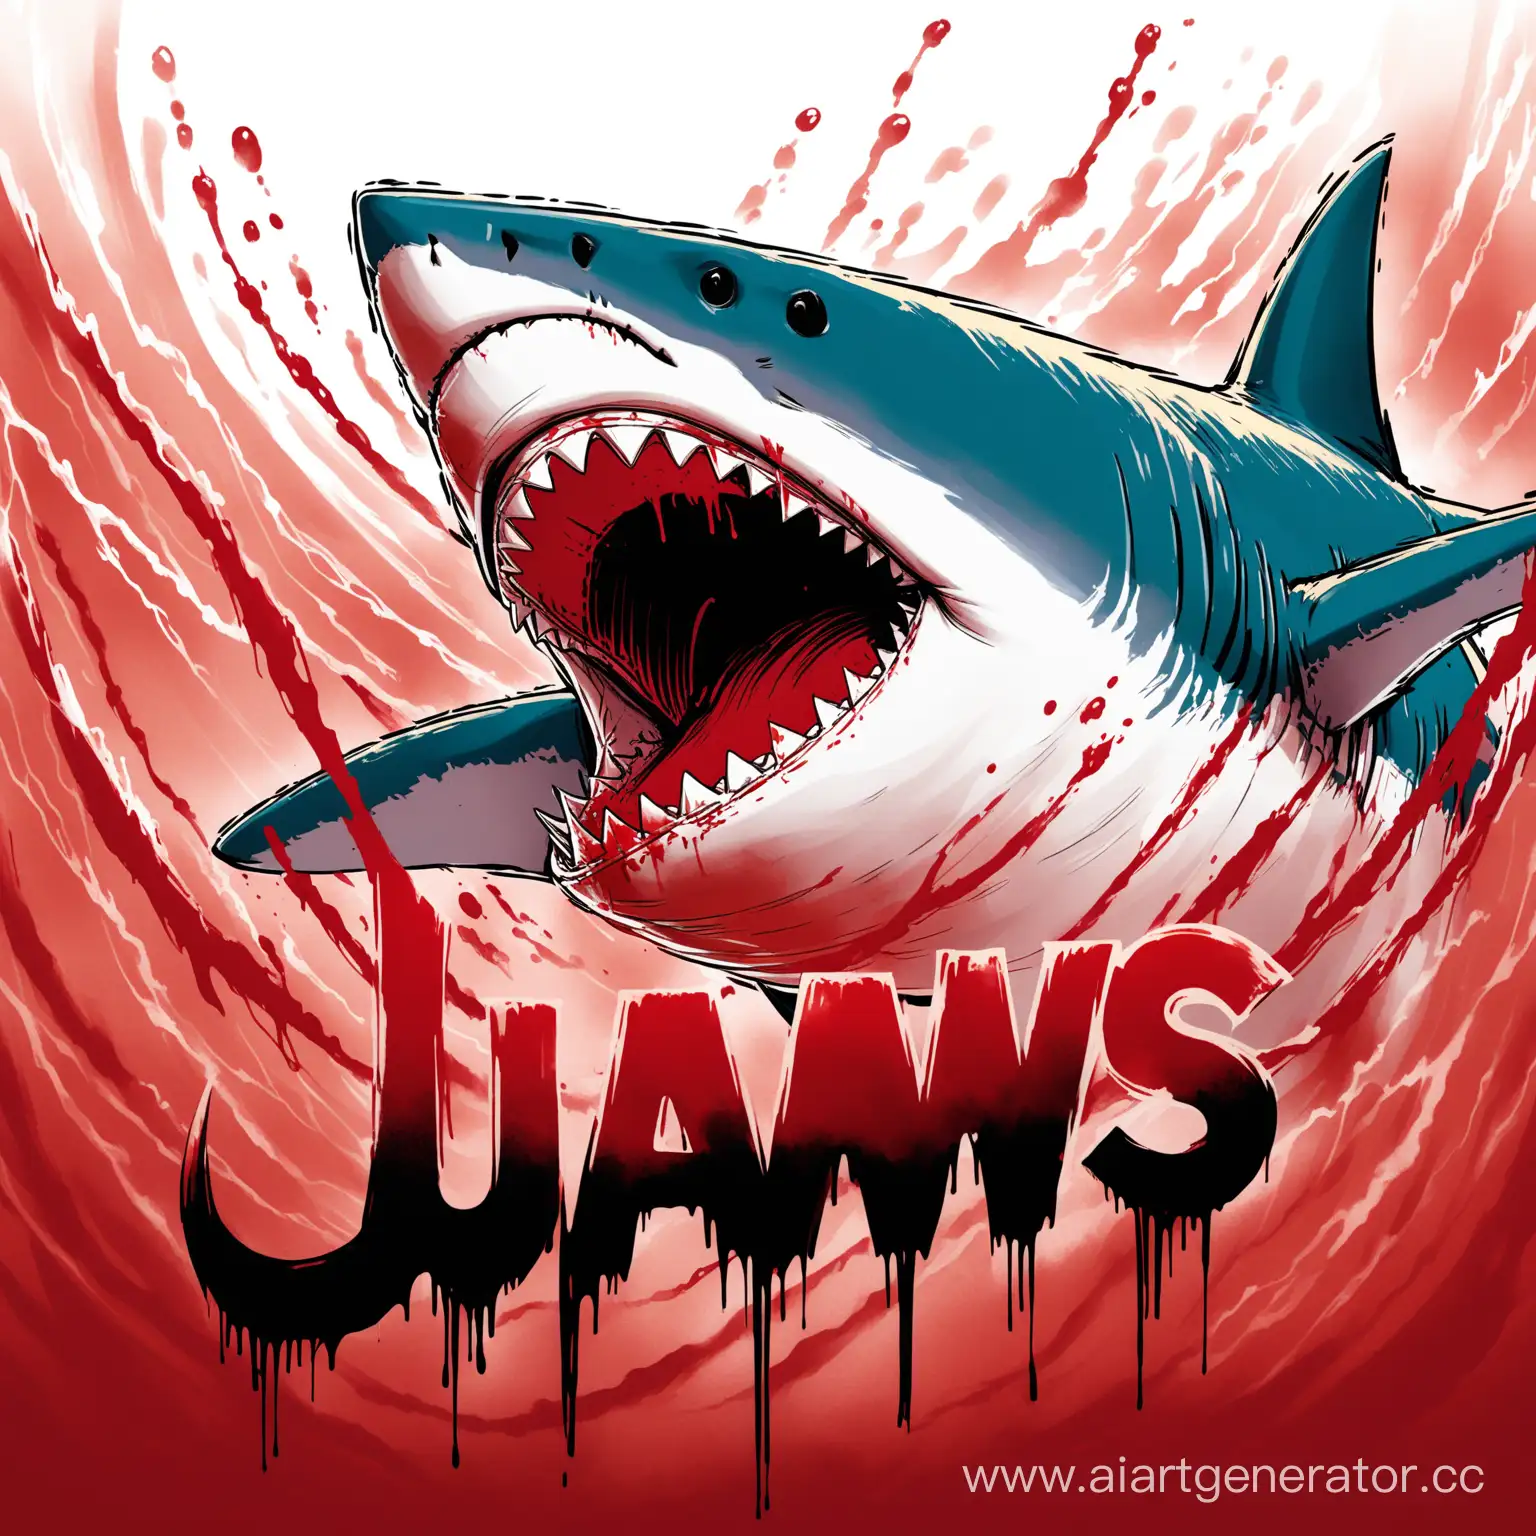 Eerie-Tribute-jawS-Nickname-in-Blood-with-Sharks-Jaw-Background